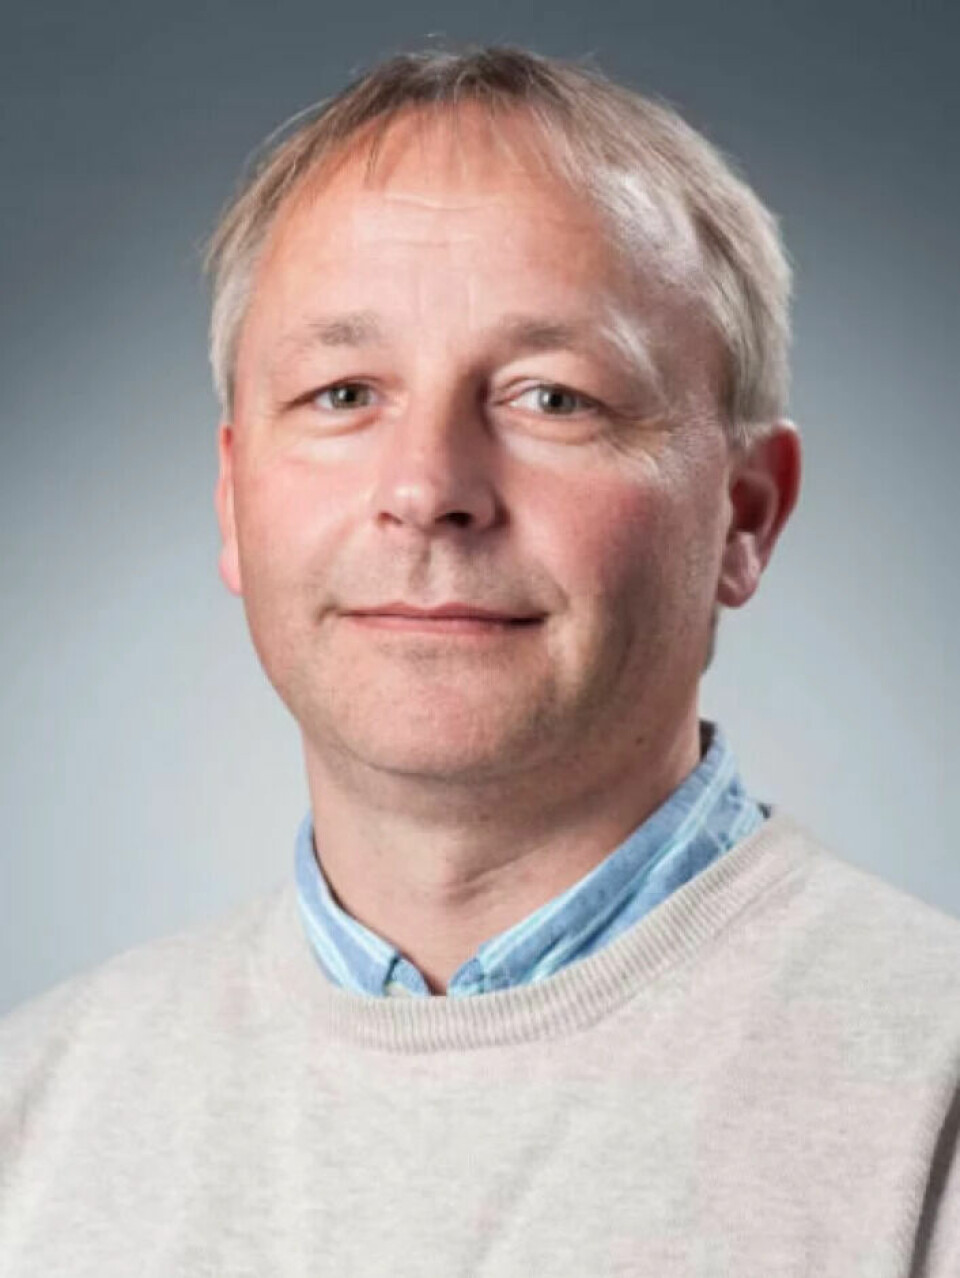 Jan Ivar Røssberg is a professor of psychiatry at the University of Oslo and senior physician in psychiatry at Oslo University Hospital.